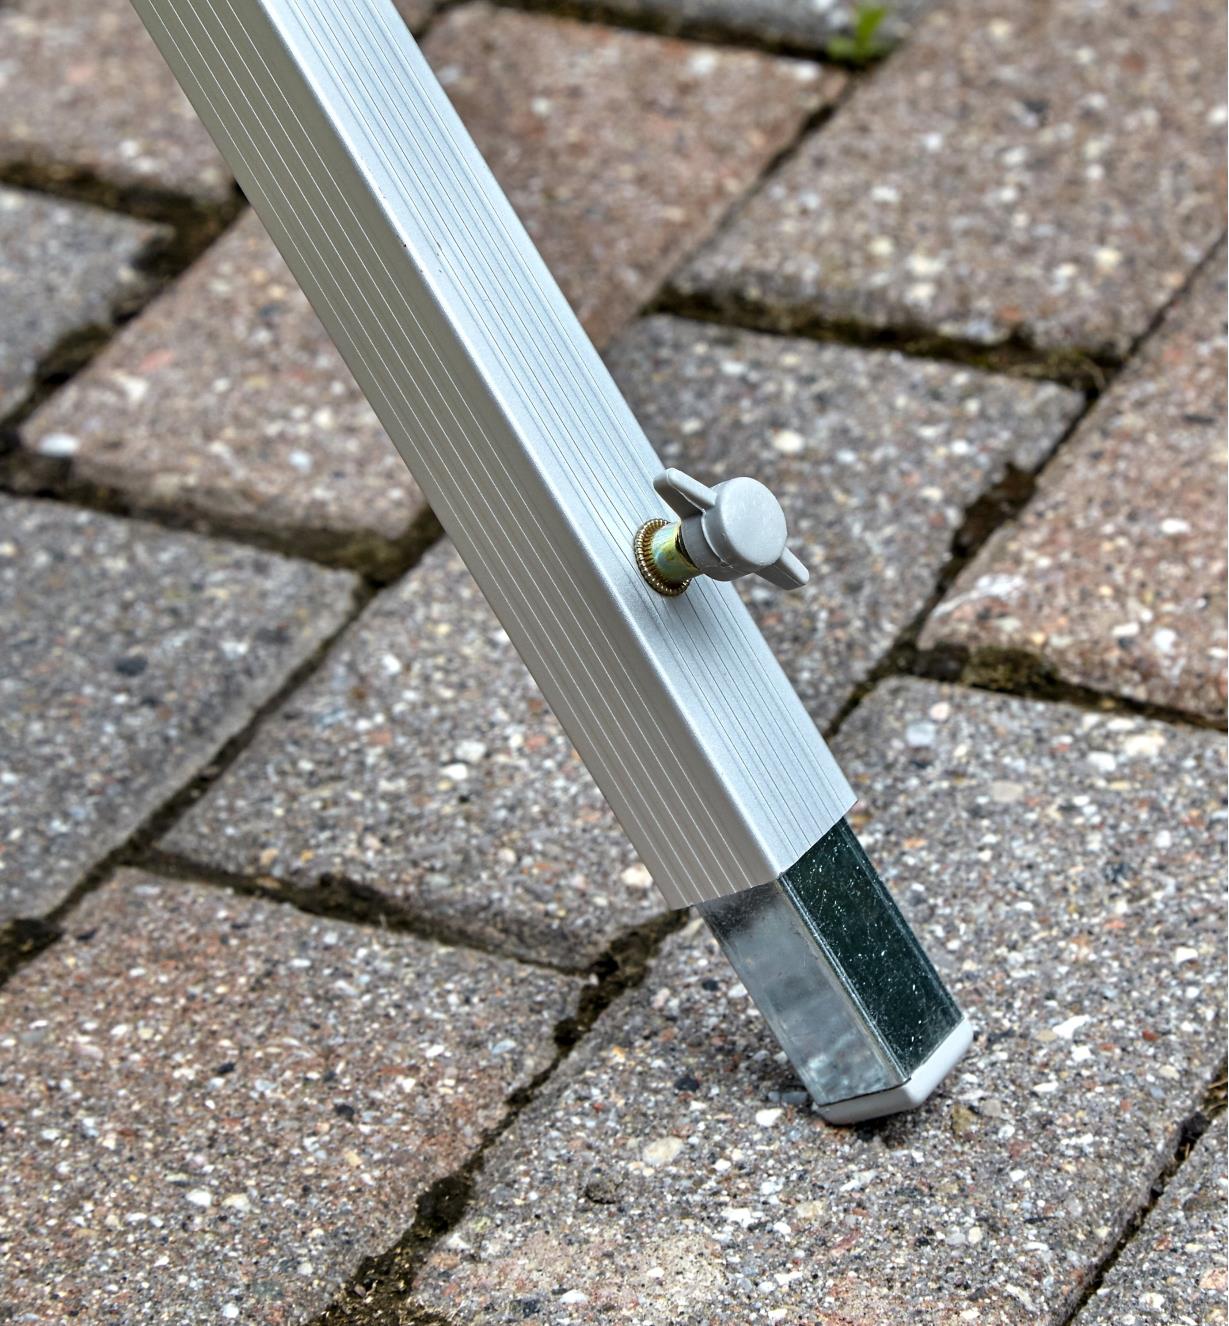 A close view of the folding aluminum table’s levelling foot, used for stability on an uneven surface